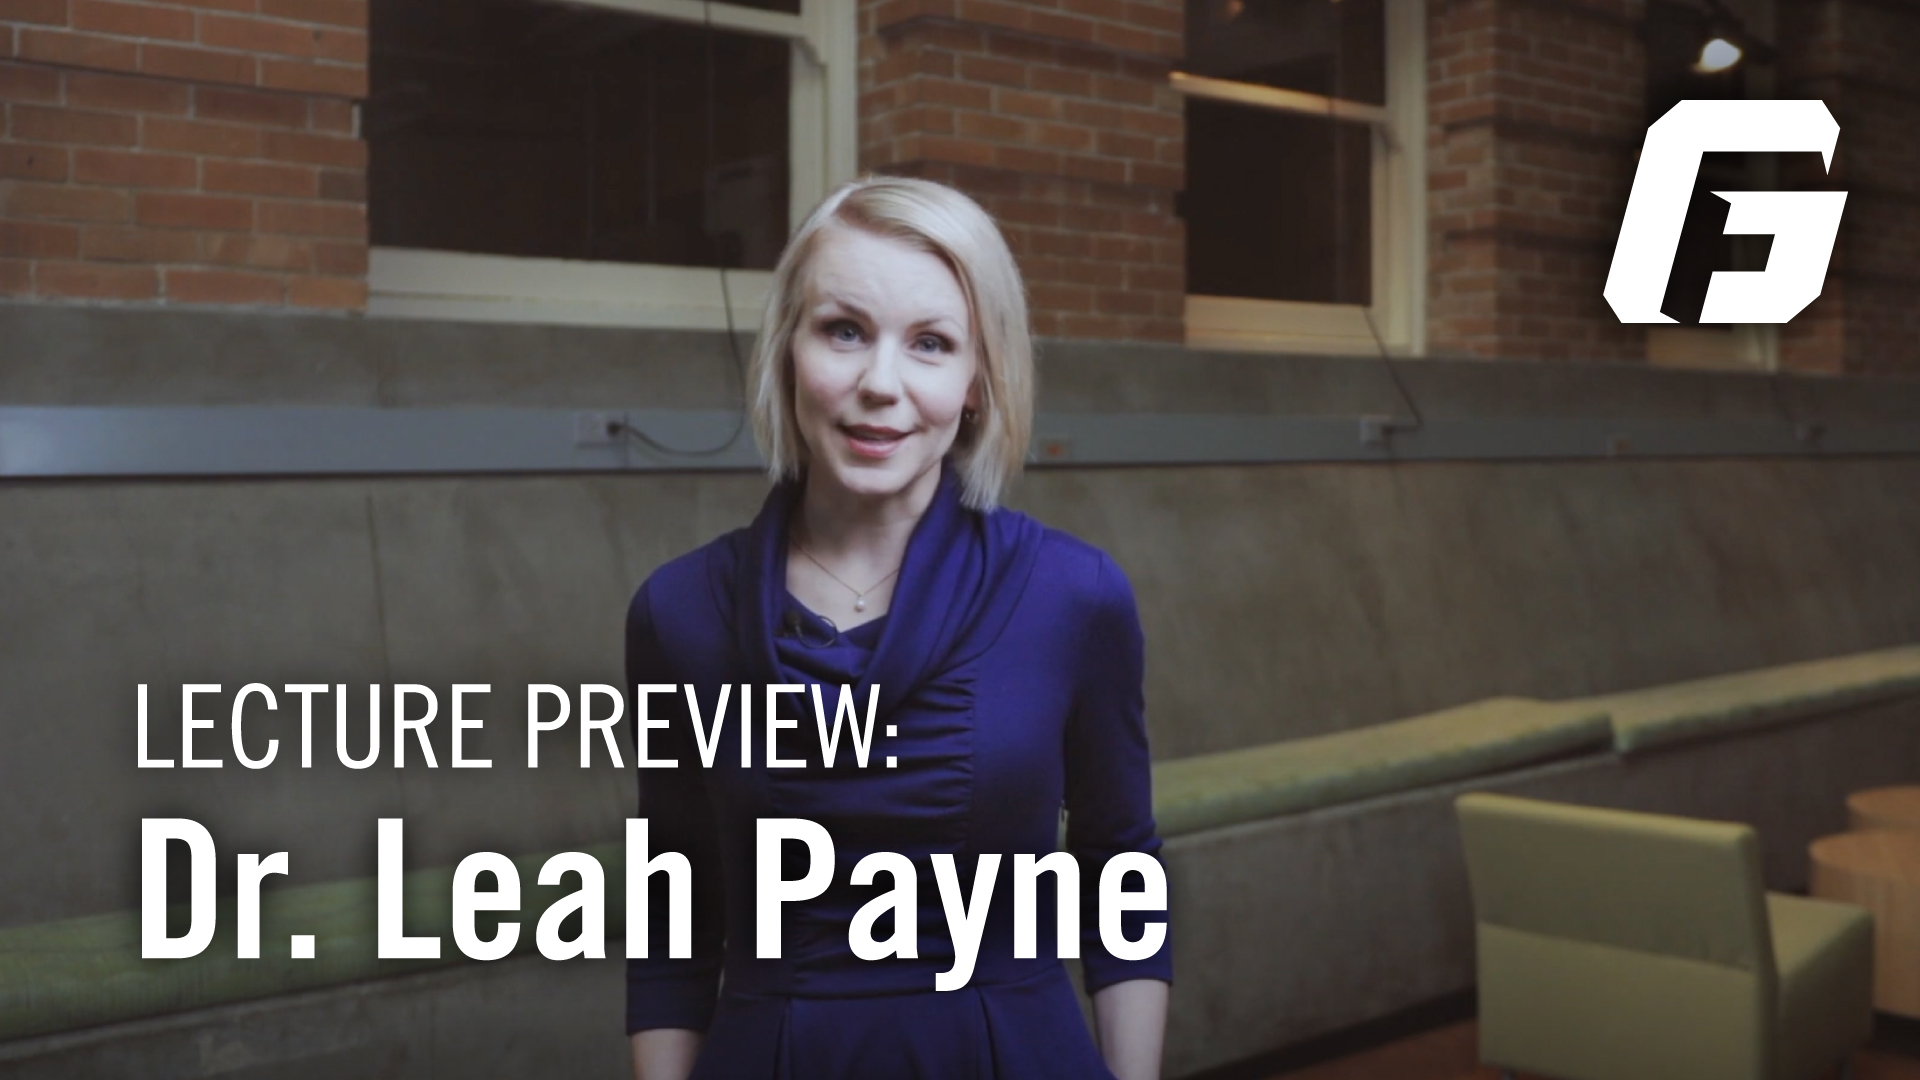 Watch video: LECTURE PREVIEW: Dr. Leah Payne